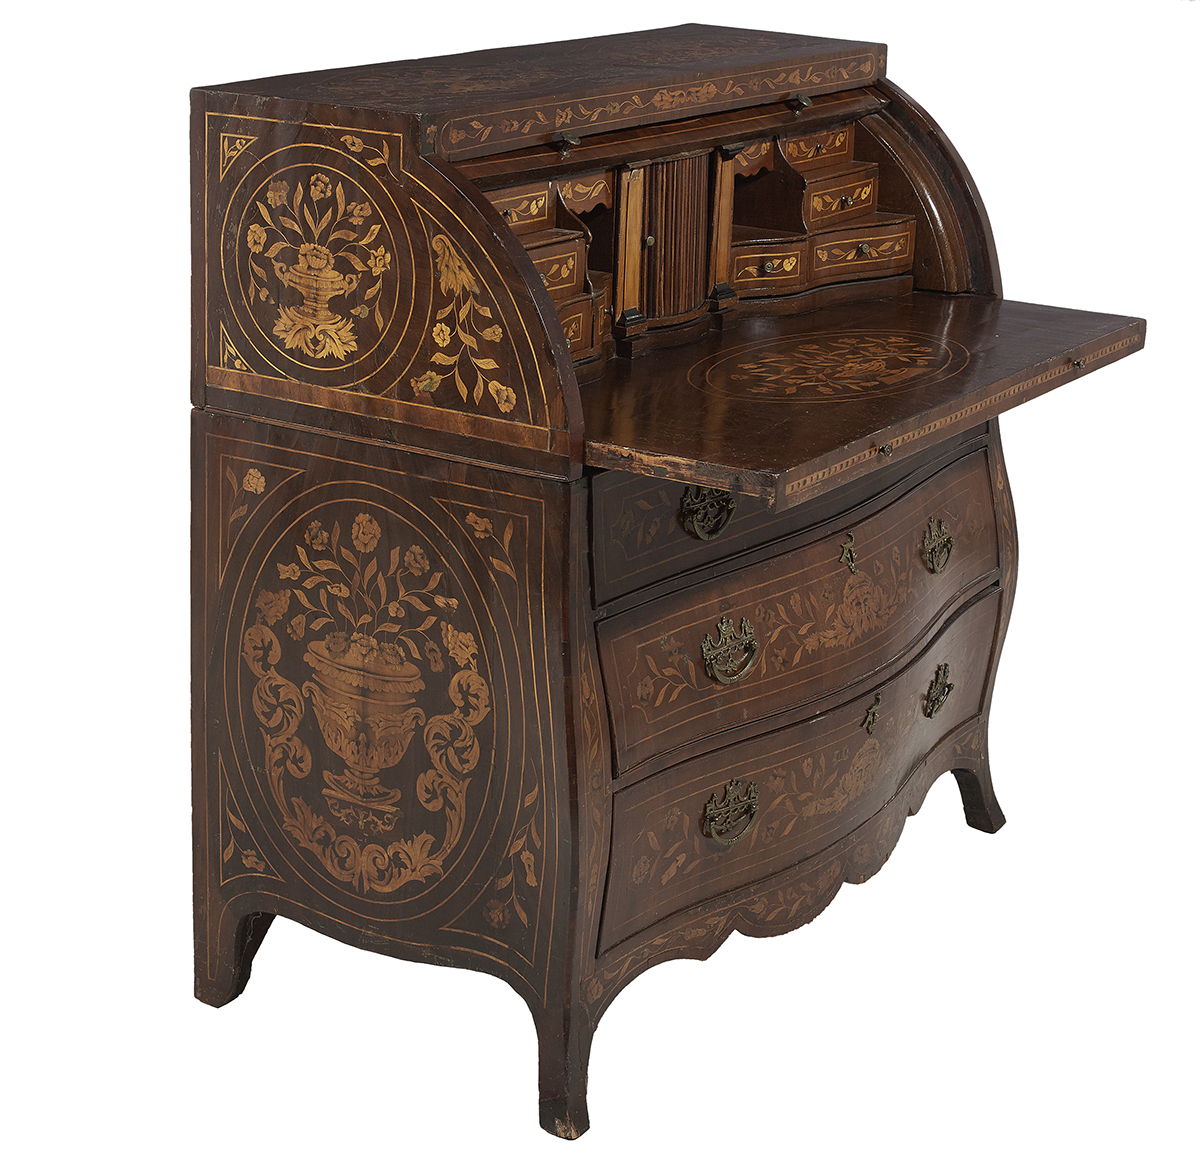 Dutch Mahogany and Marquetry Bureau Cylindre - Image 3 of 3